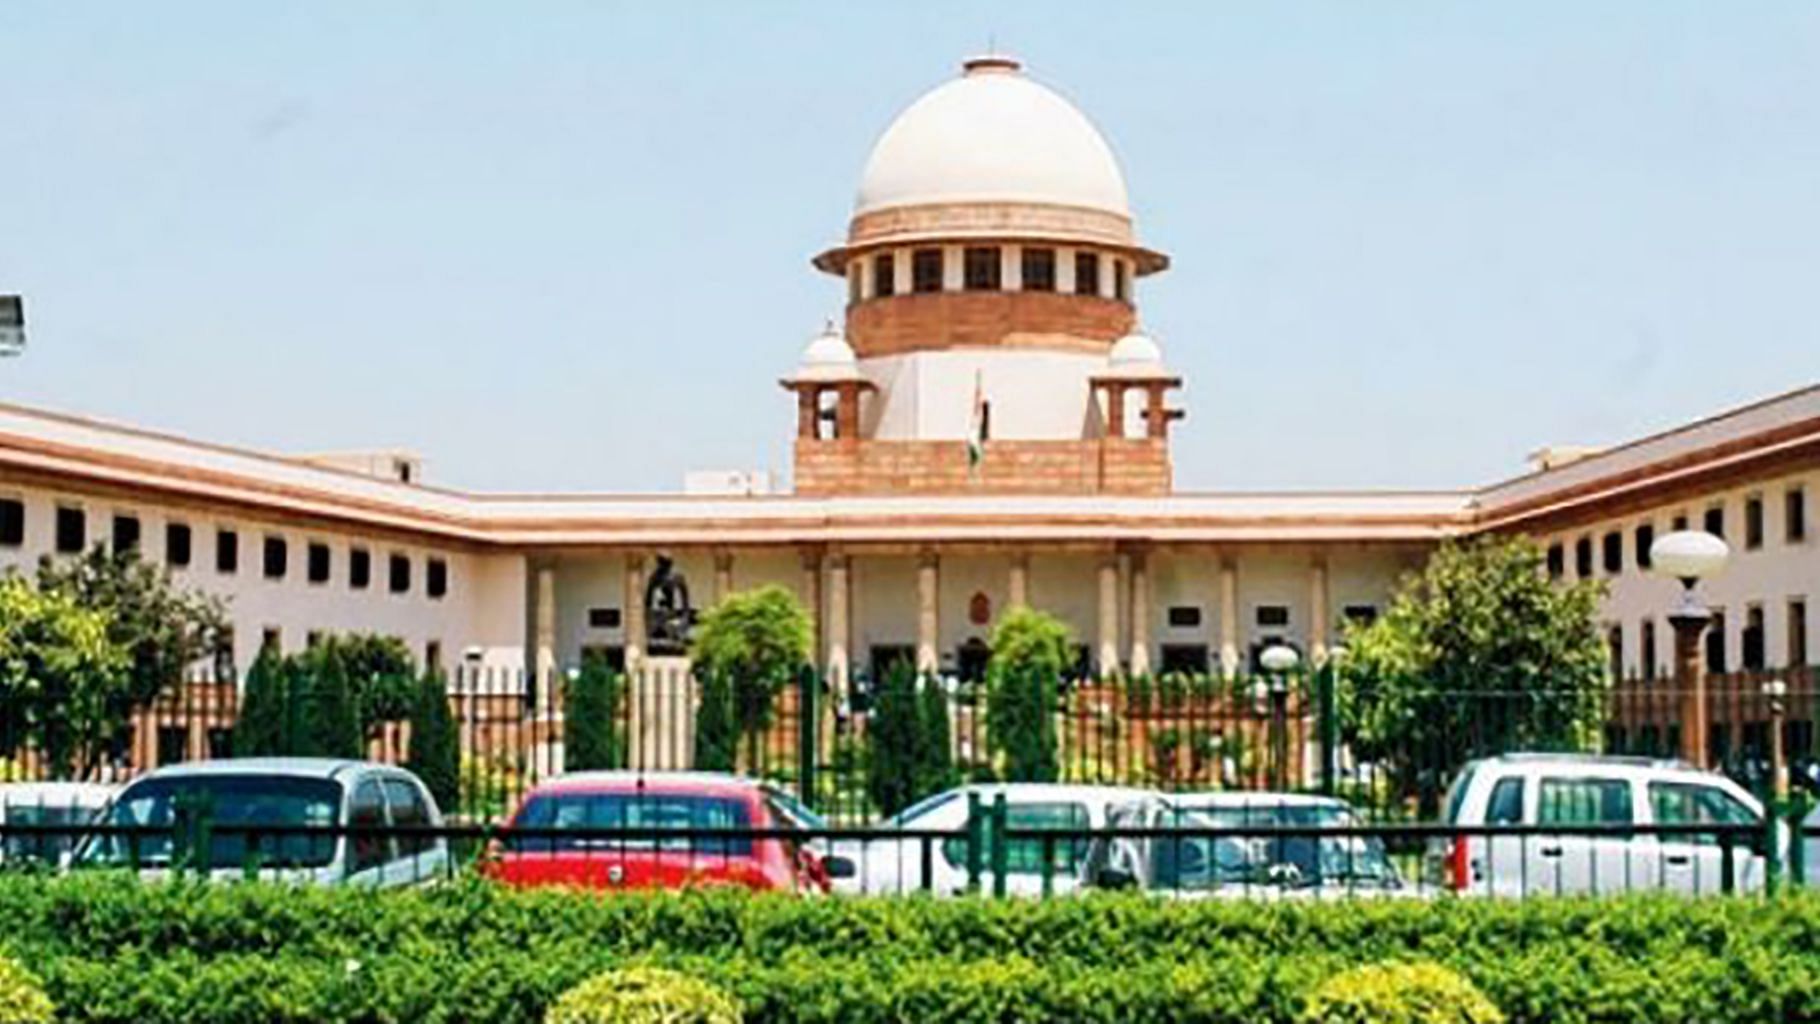 The Supreme Court of India will hear arguments from both parties in a few weeks on Wednesday, December 2, 2020.